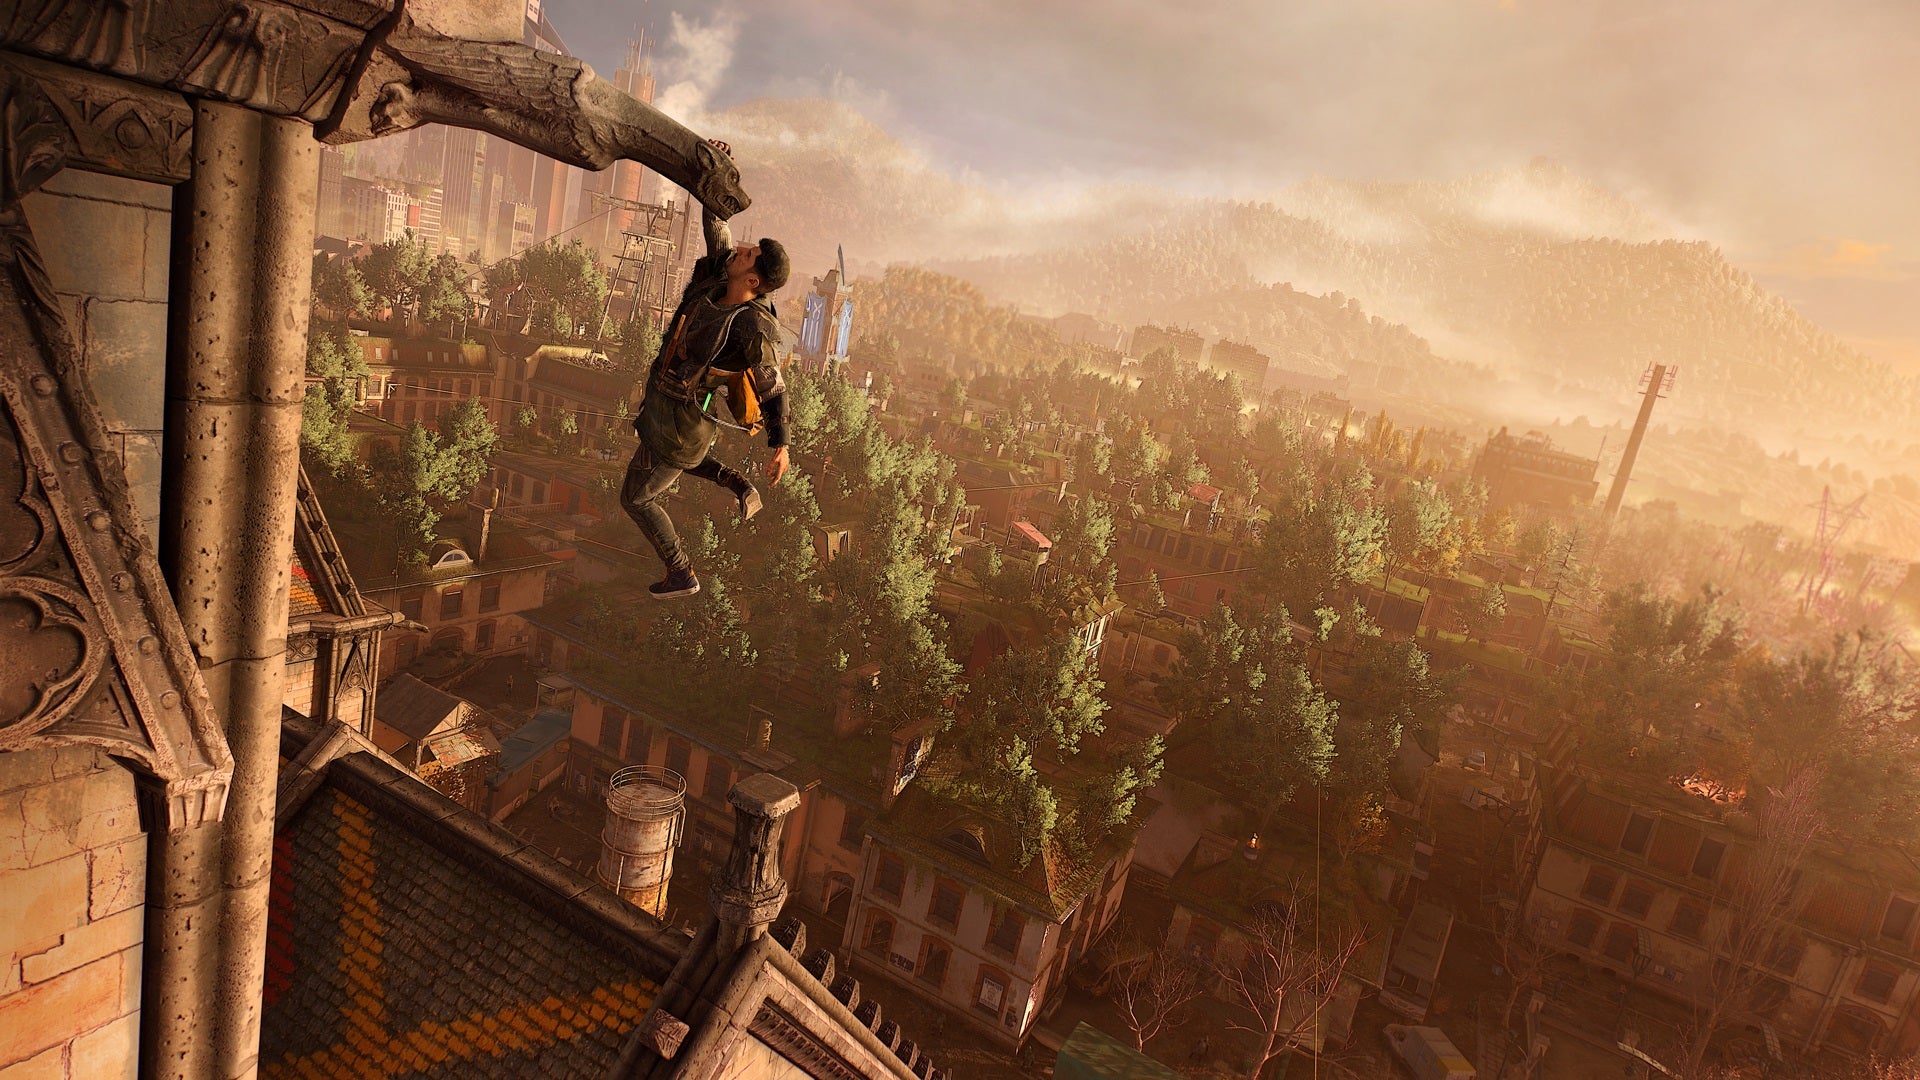 A character hangs precariously by one hand from a high vantage point above the city in Dying Light 2.